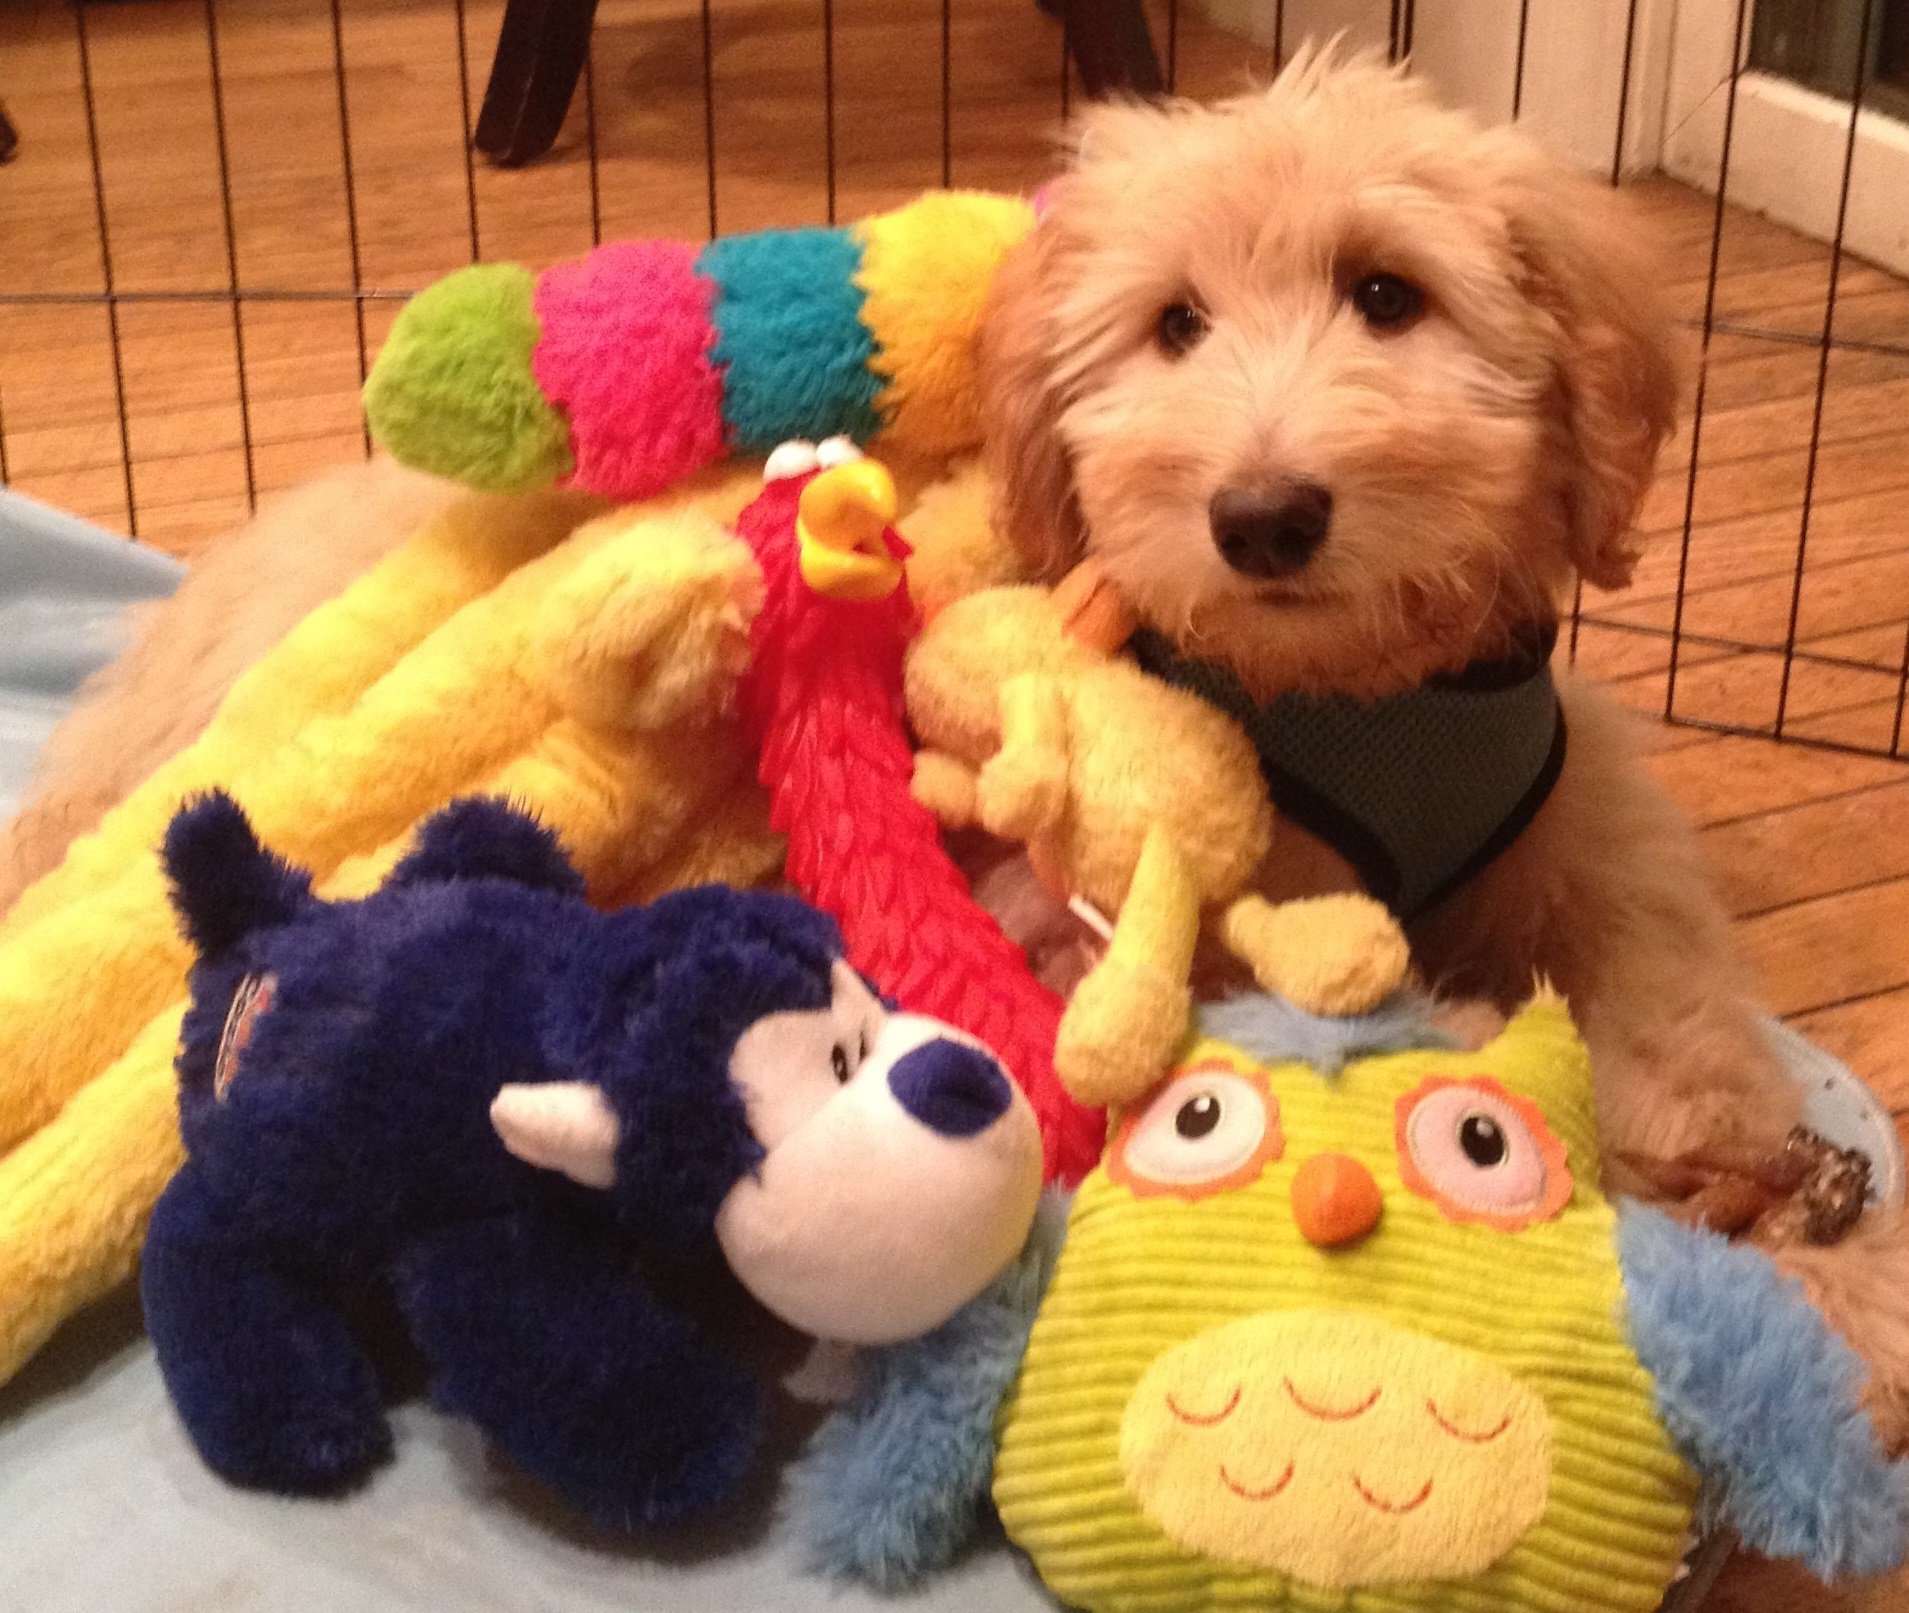 A puppy dog covered in stuffed animal-the puppy dog close in the sales process